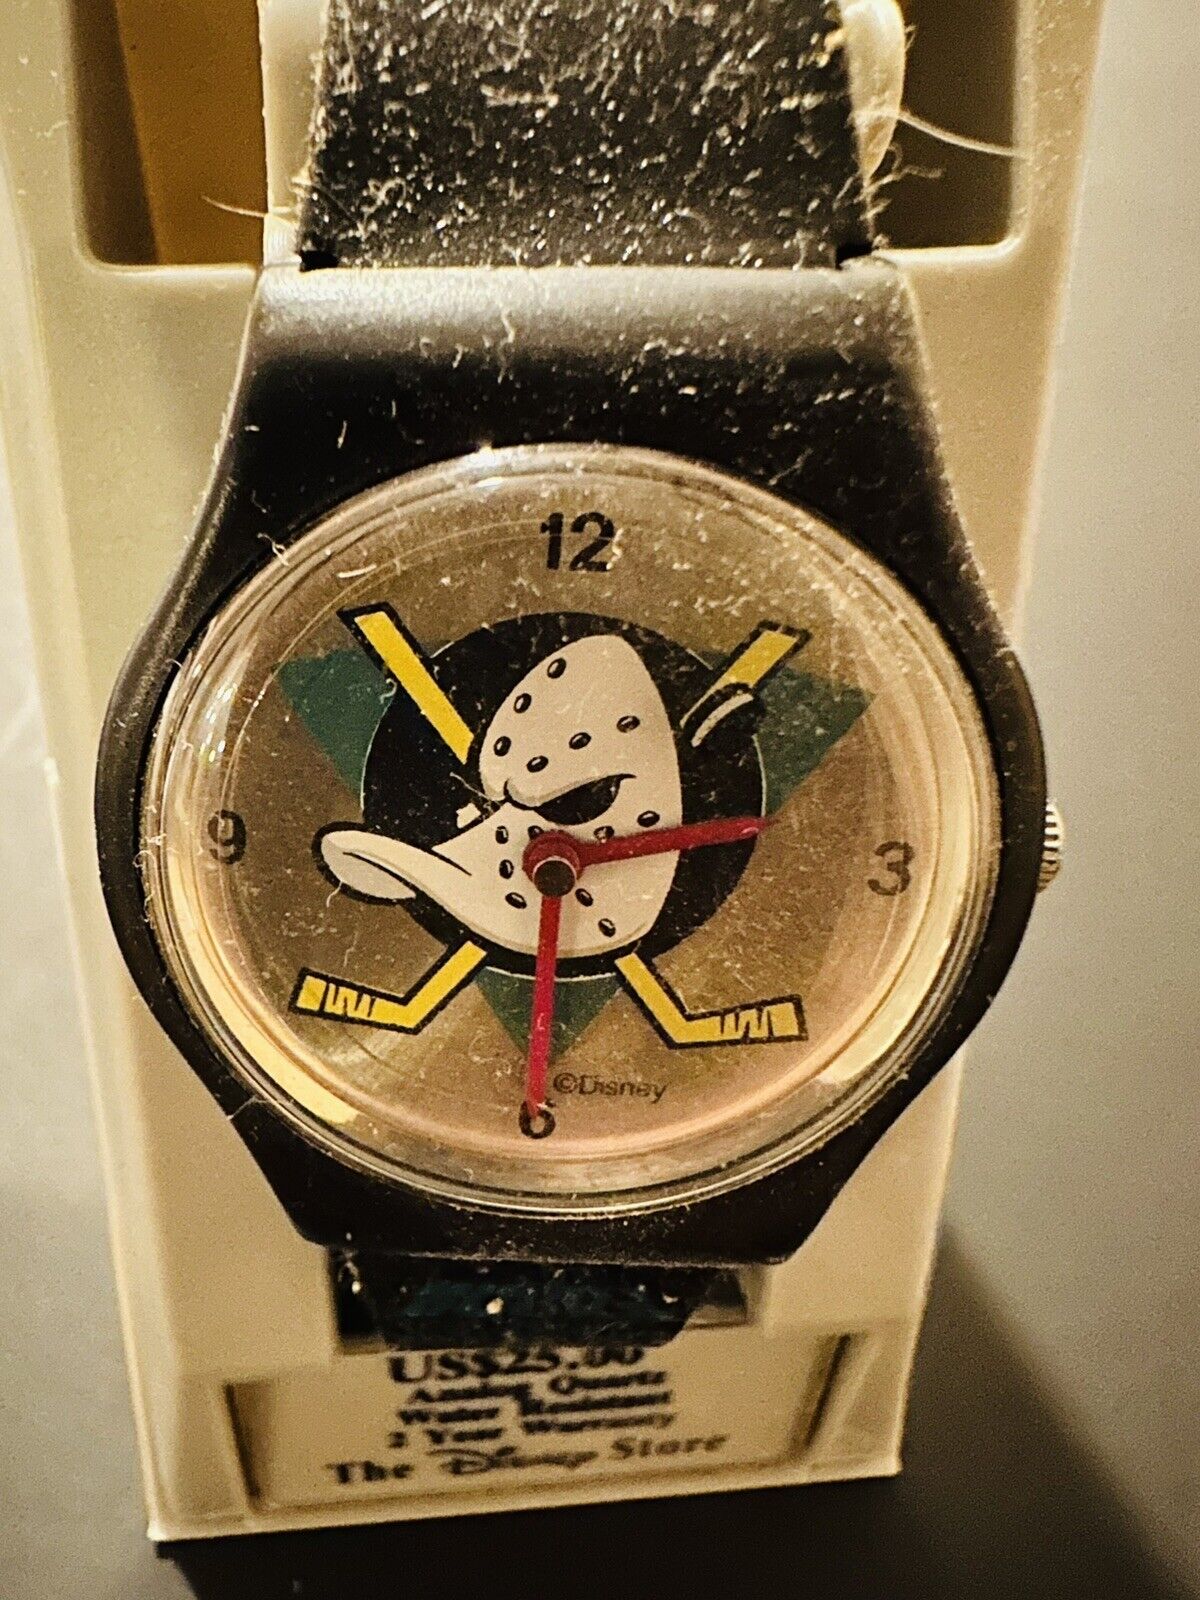 DISNEY'S MIGHTY DUCKS WATCH WITH ROTATING PUCK IN CASE EXTREMELY RARE VINTAGE